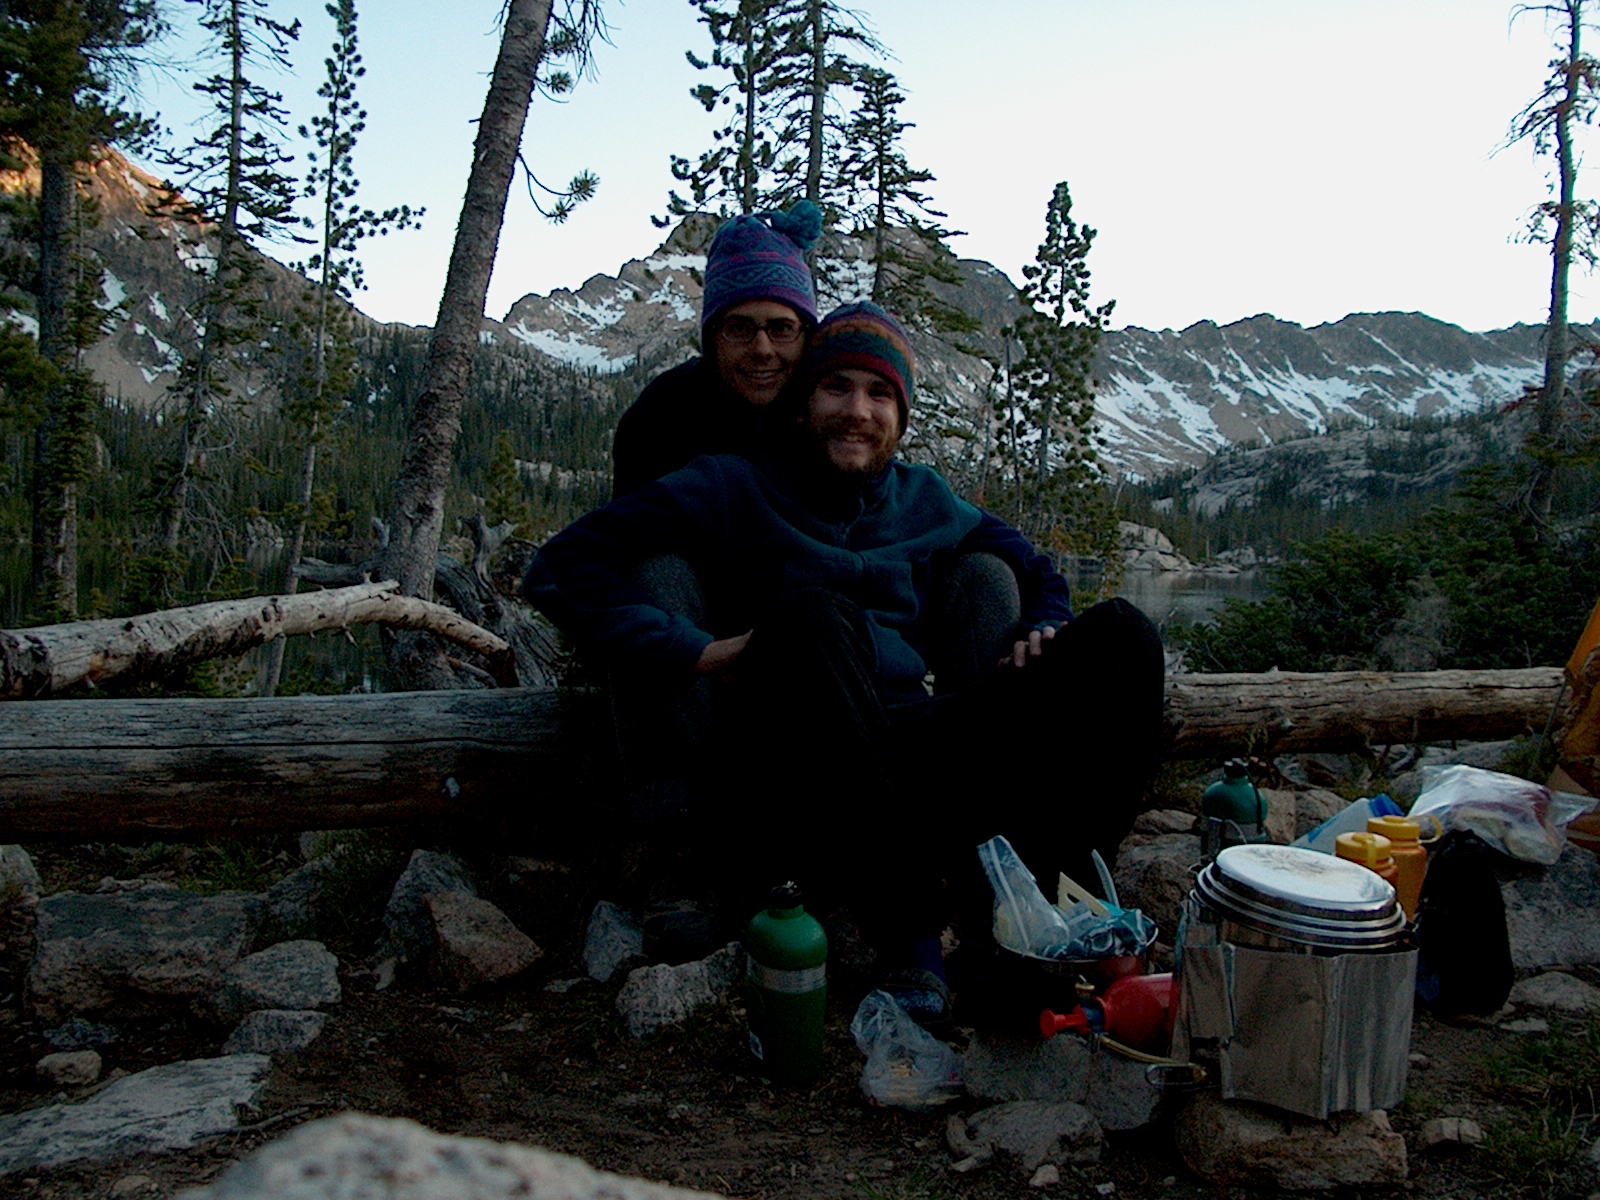 A man and woman sitting on a log beside a backpacking stove